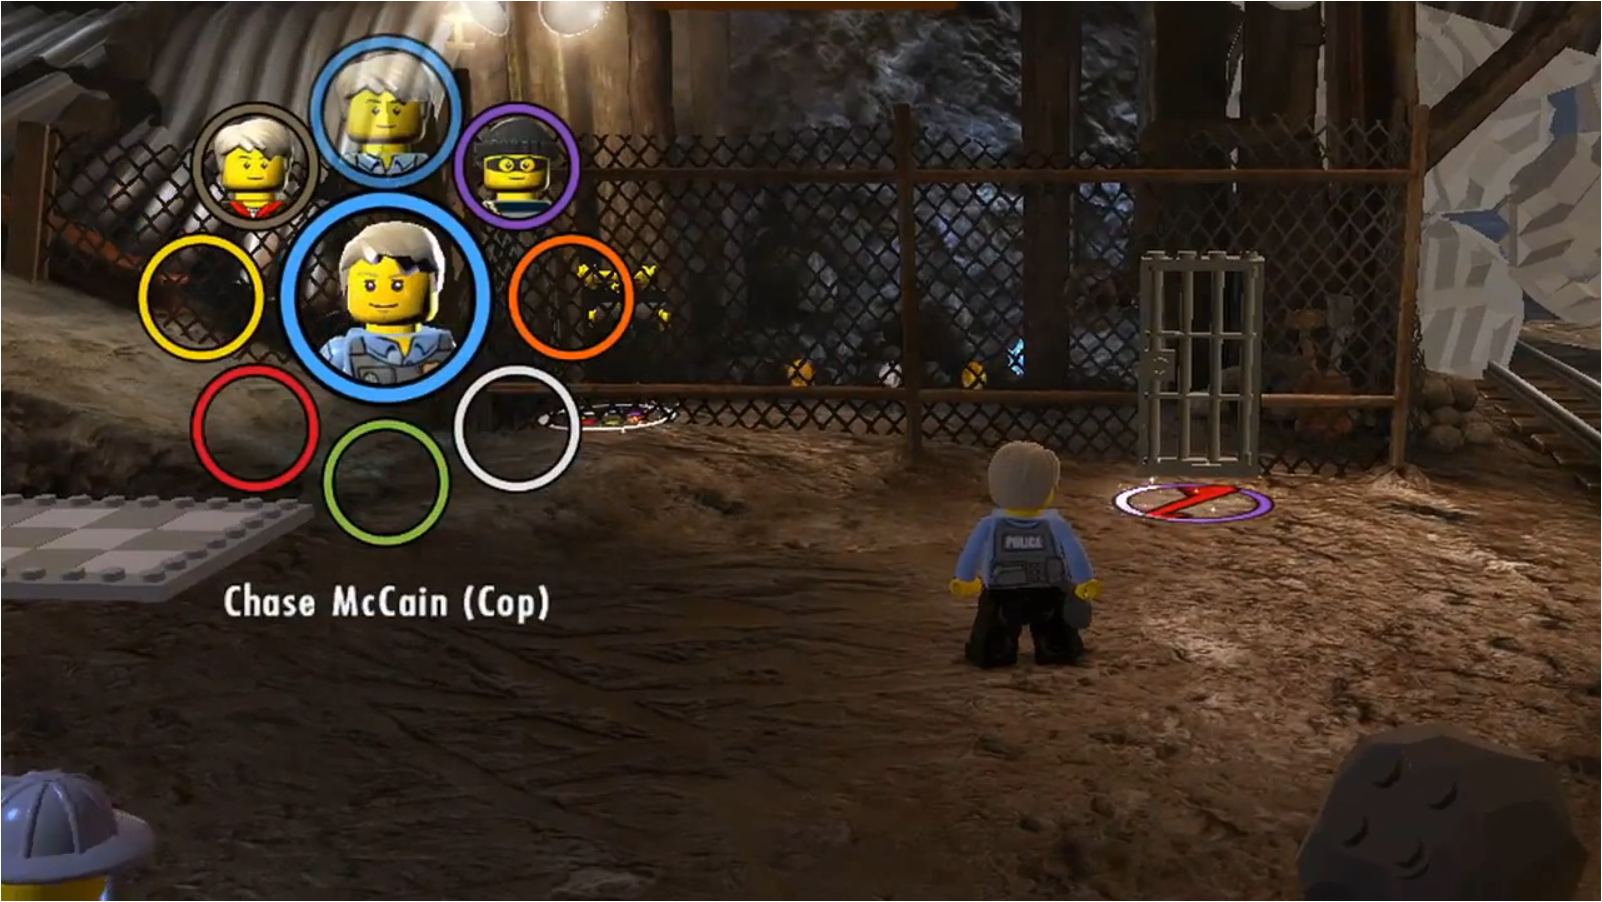 lego city undercover free download for android